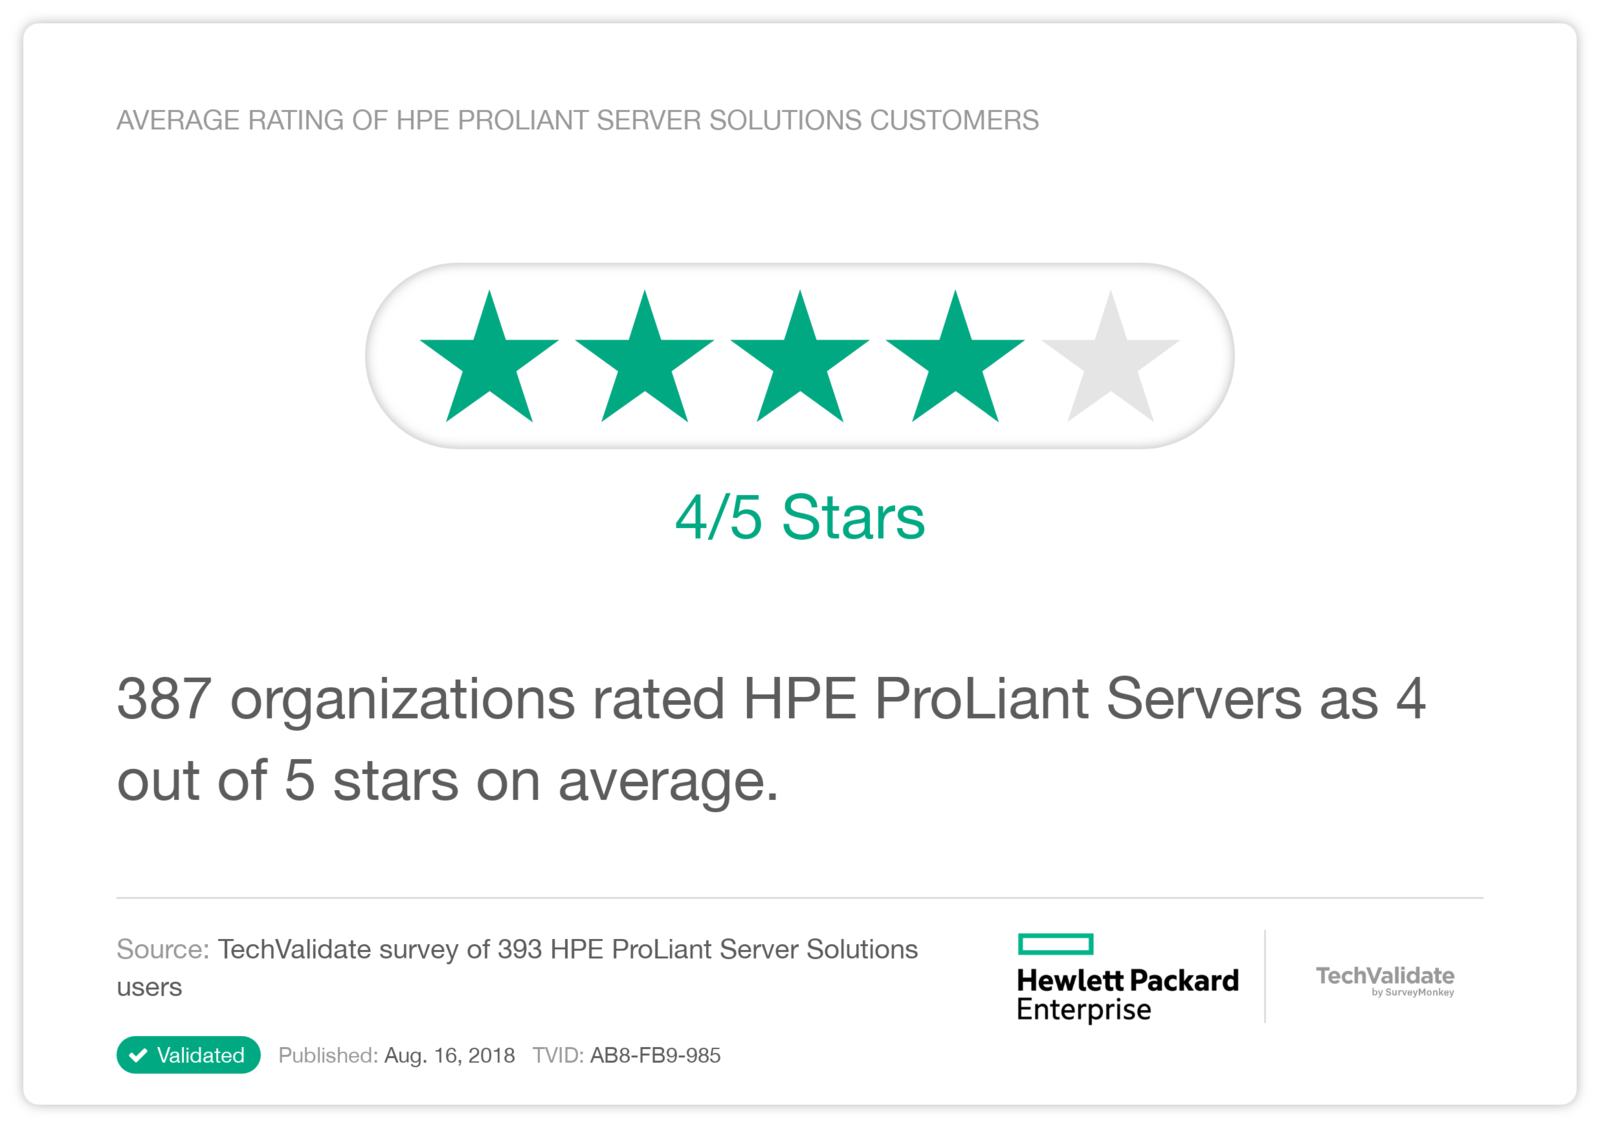 Average Rating of HPE ProLiant Server Solutions Customers